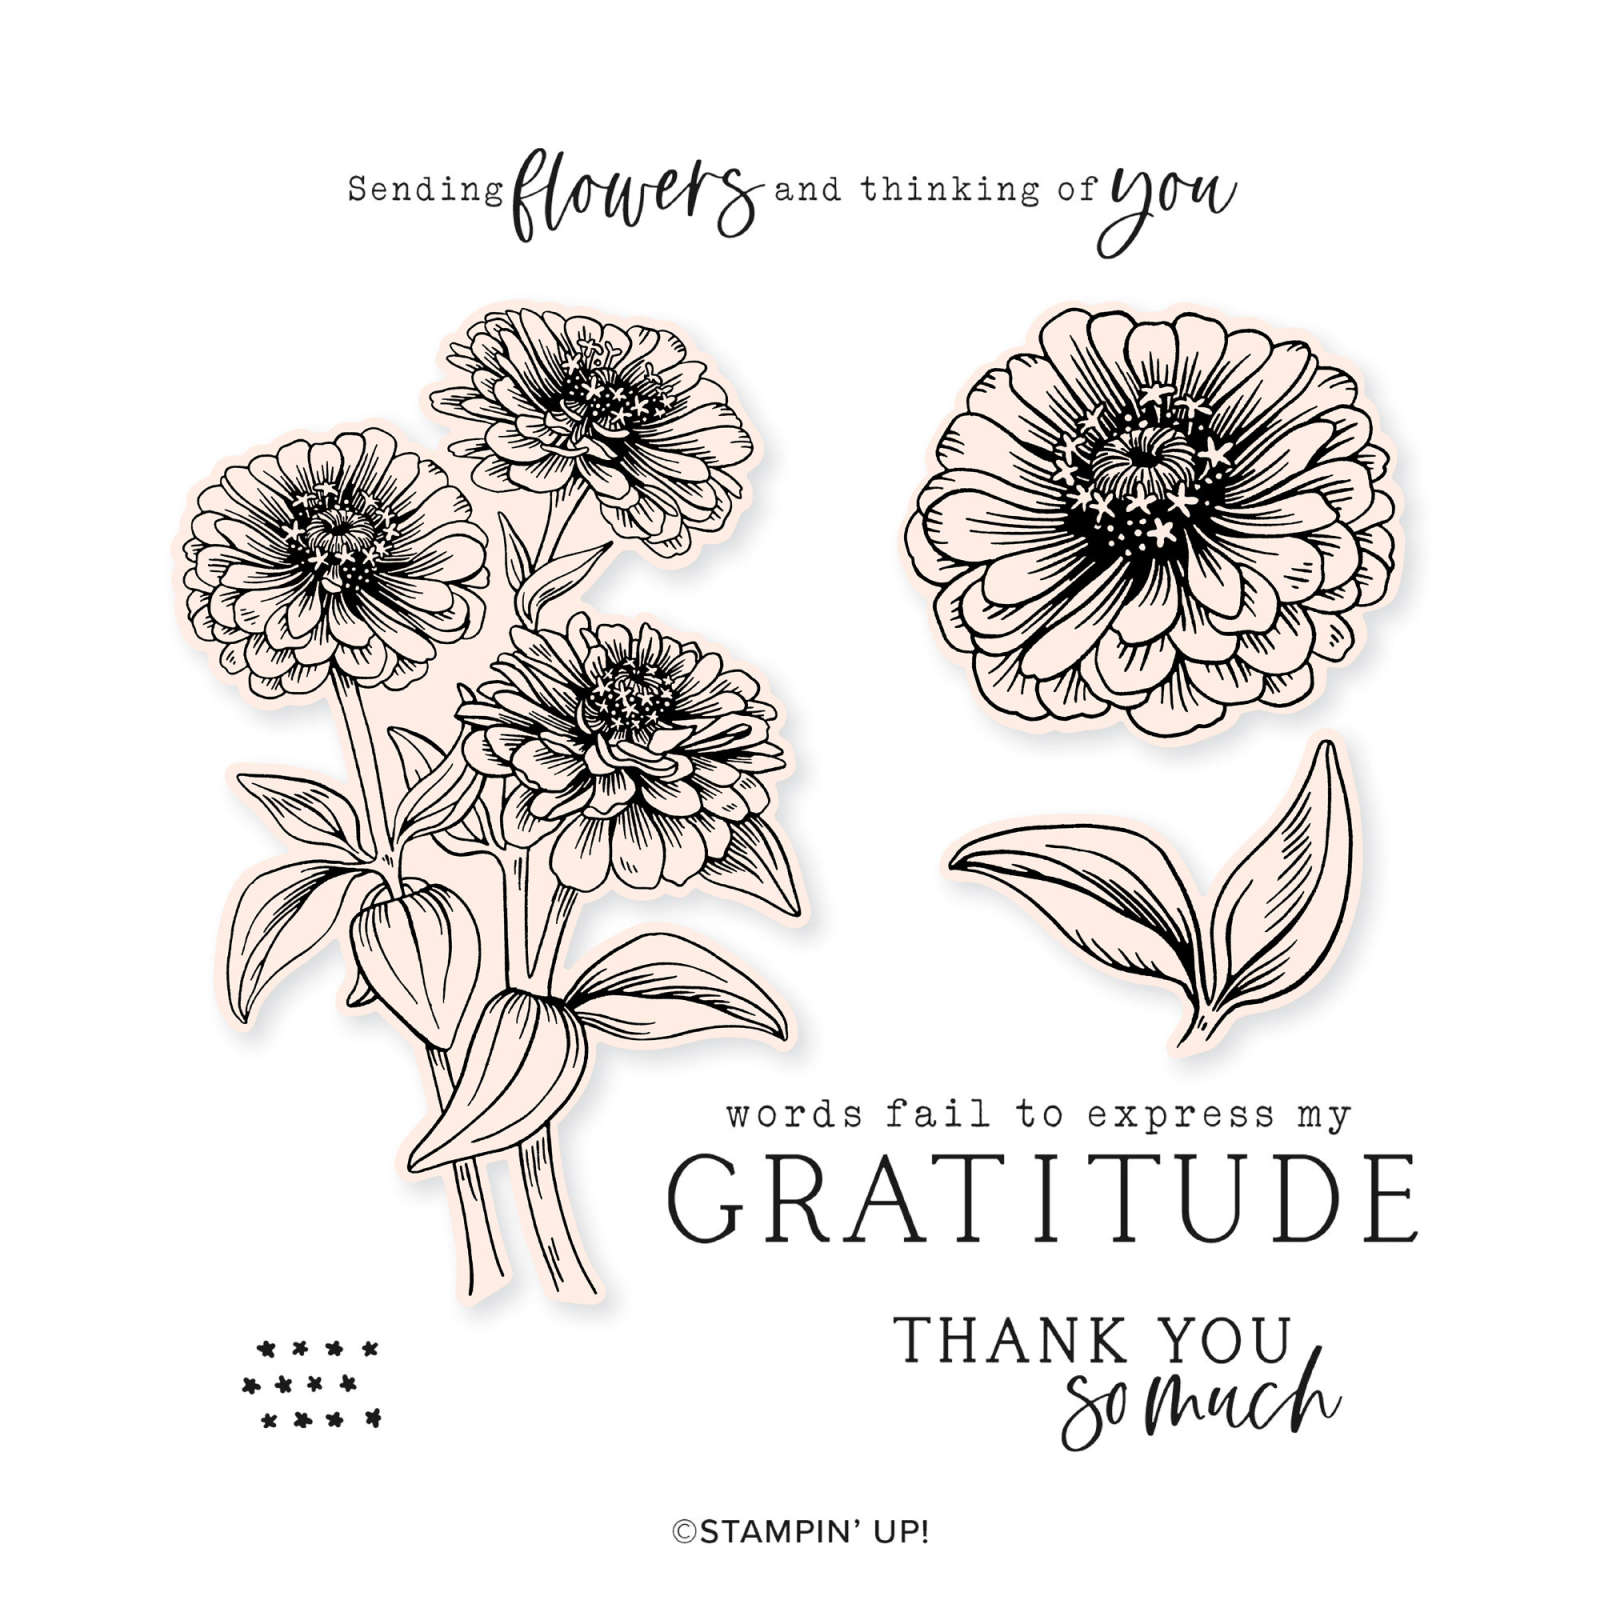 Stampin Up Zinnia and Latte Stamps in the Mail Kit